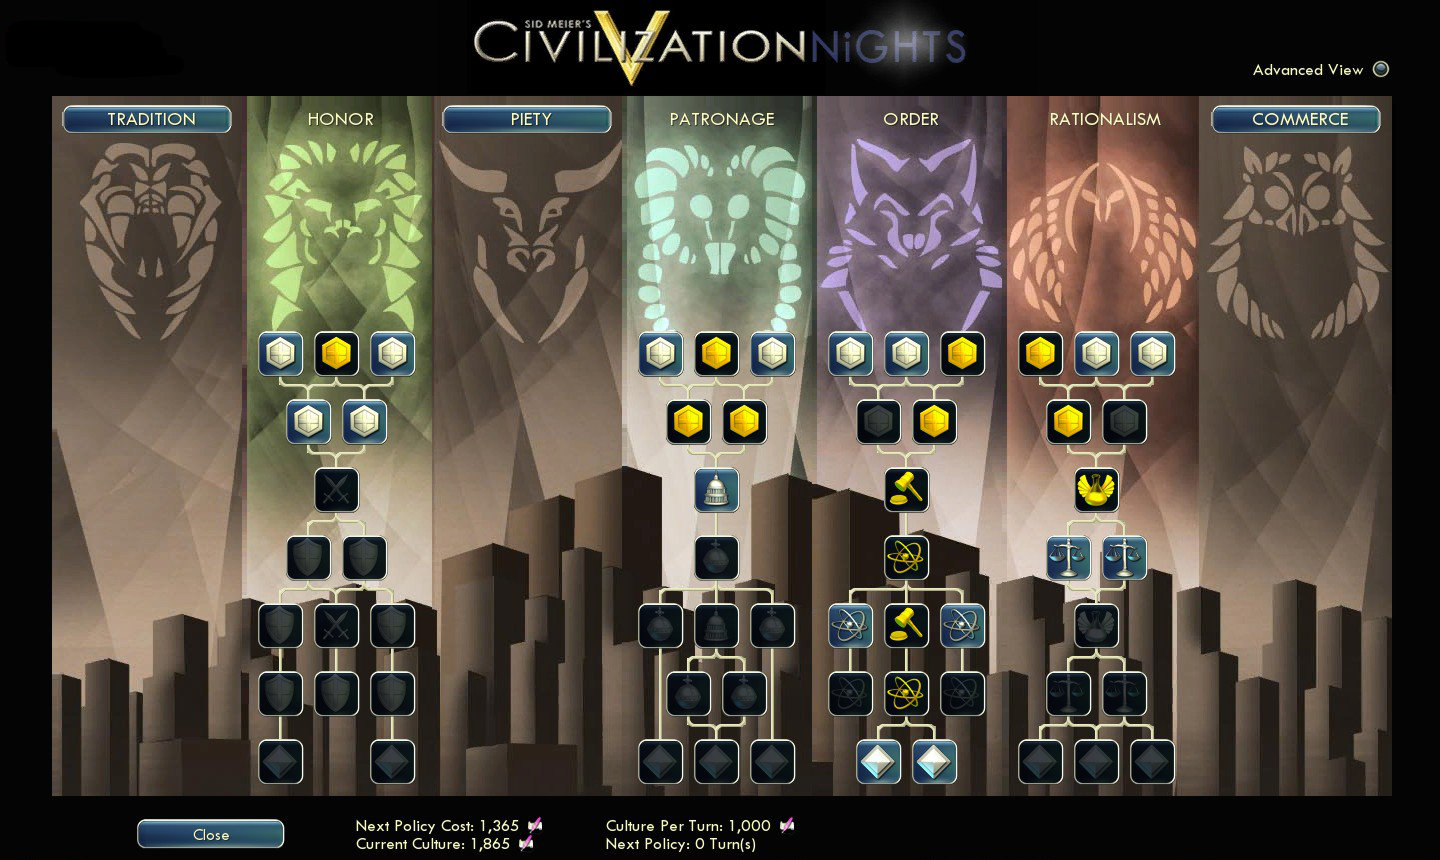 What are the differences between Civilization V and